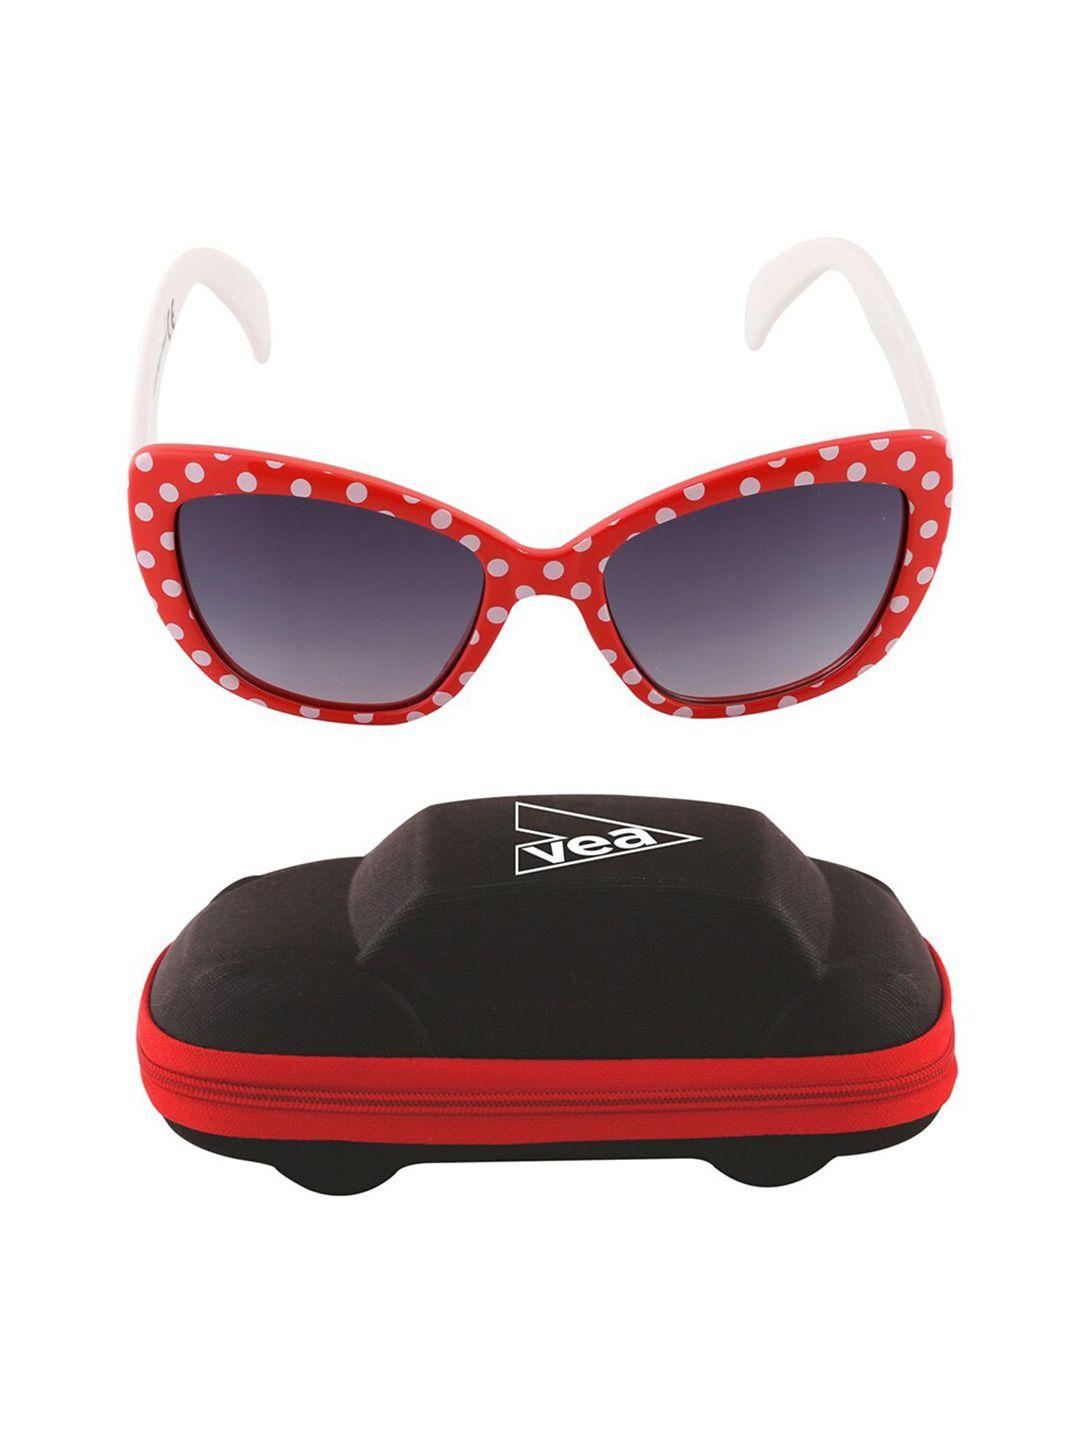 vea girls cateye sunglasses with uv protected lens